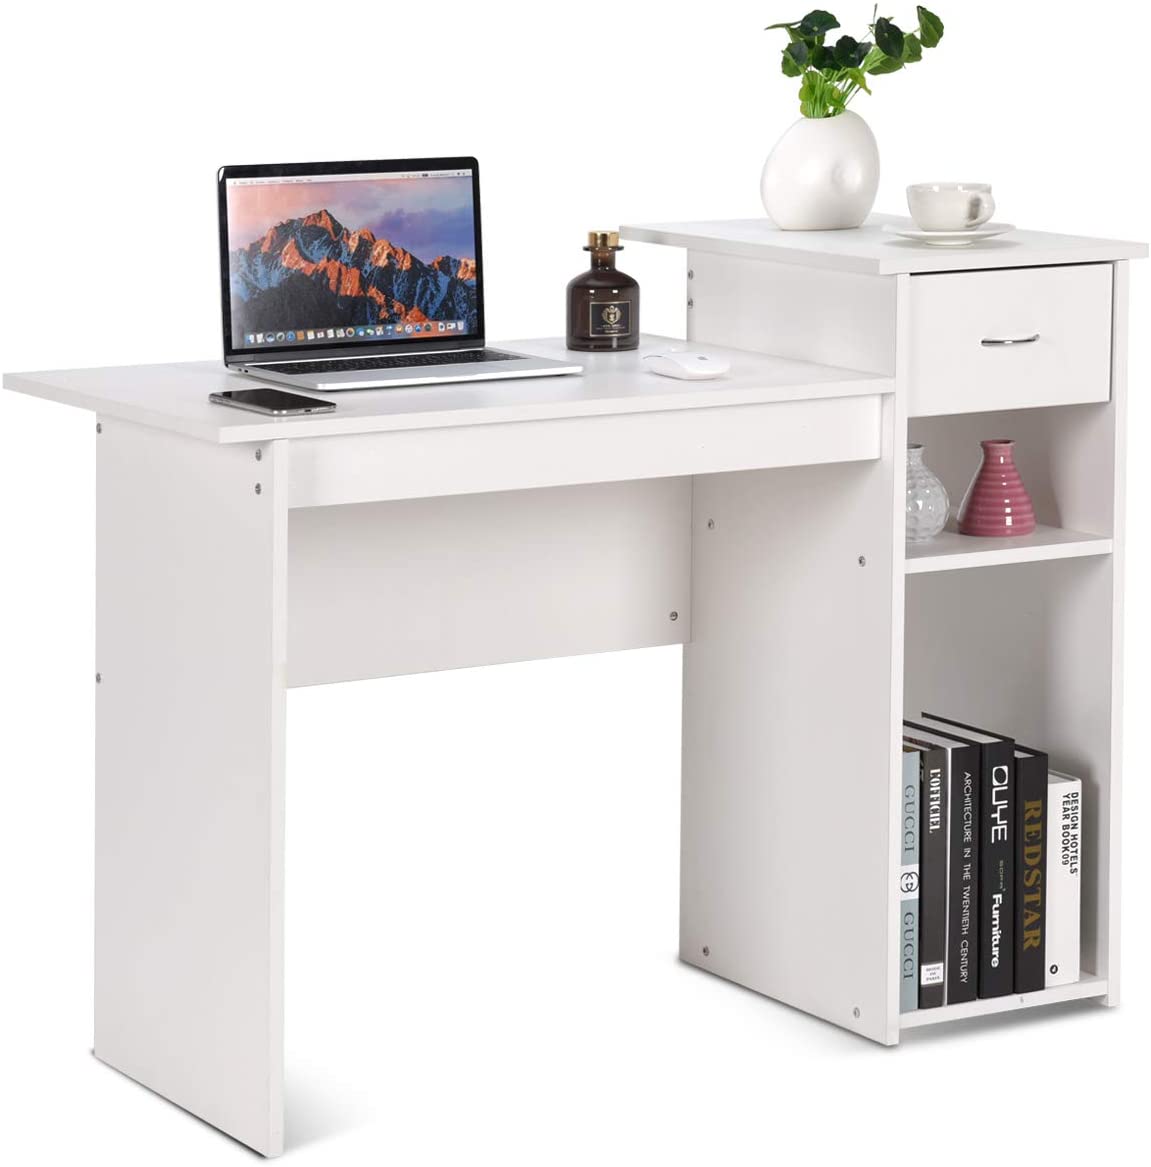 Tangkula Computer Desk, Home Office Wooden PC Laptop Desk, Modern Simple Style Wood Study Workstation, Writing Table with Storage Drawer & Shelves, Wooden Furniture (White)